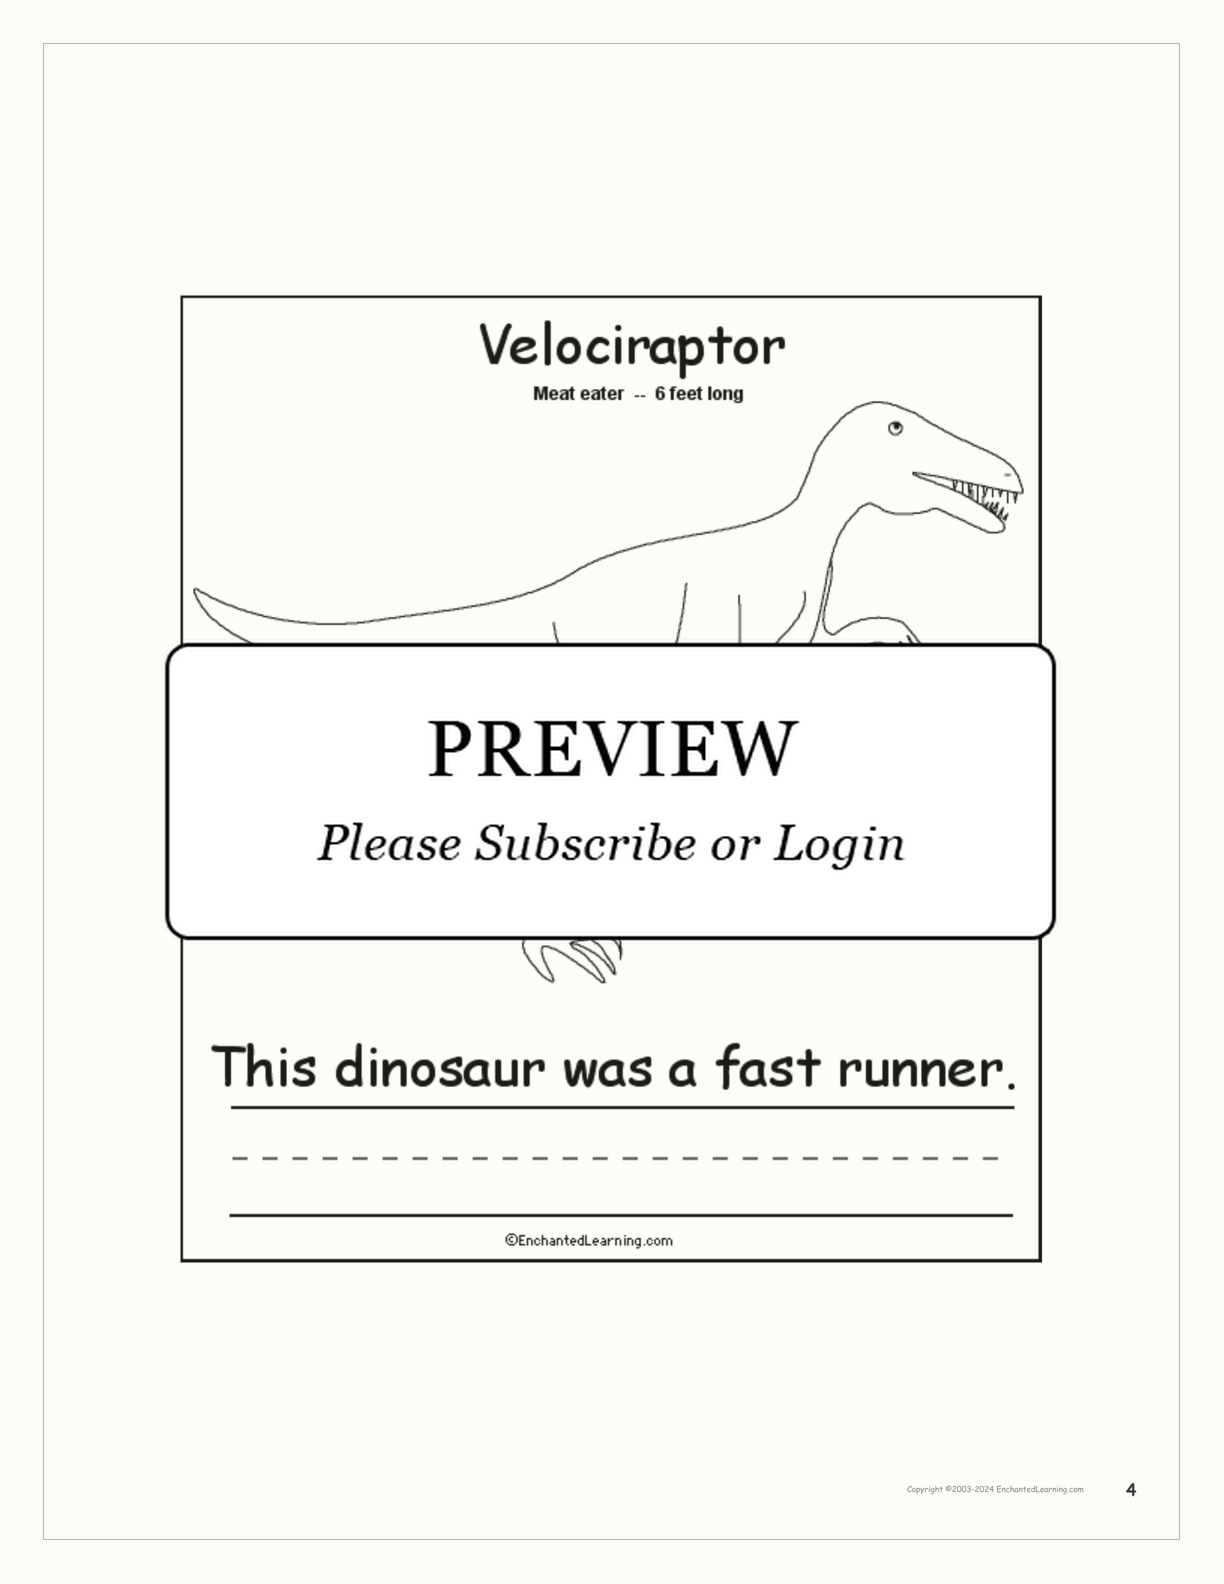 This Dinosaur... Early Reader Book interactive printout page 4